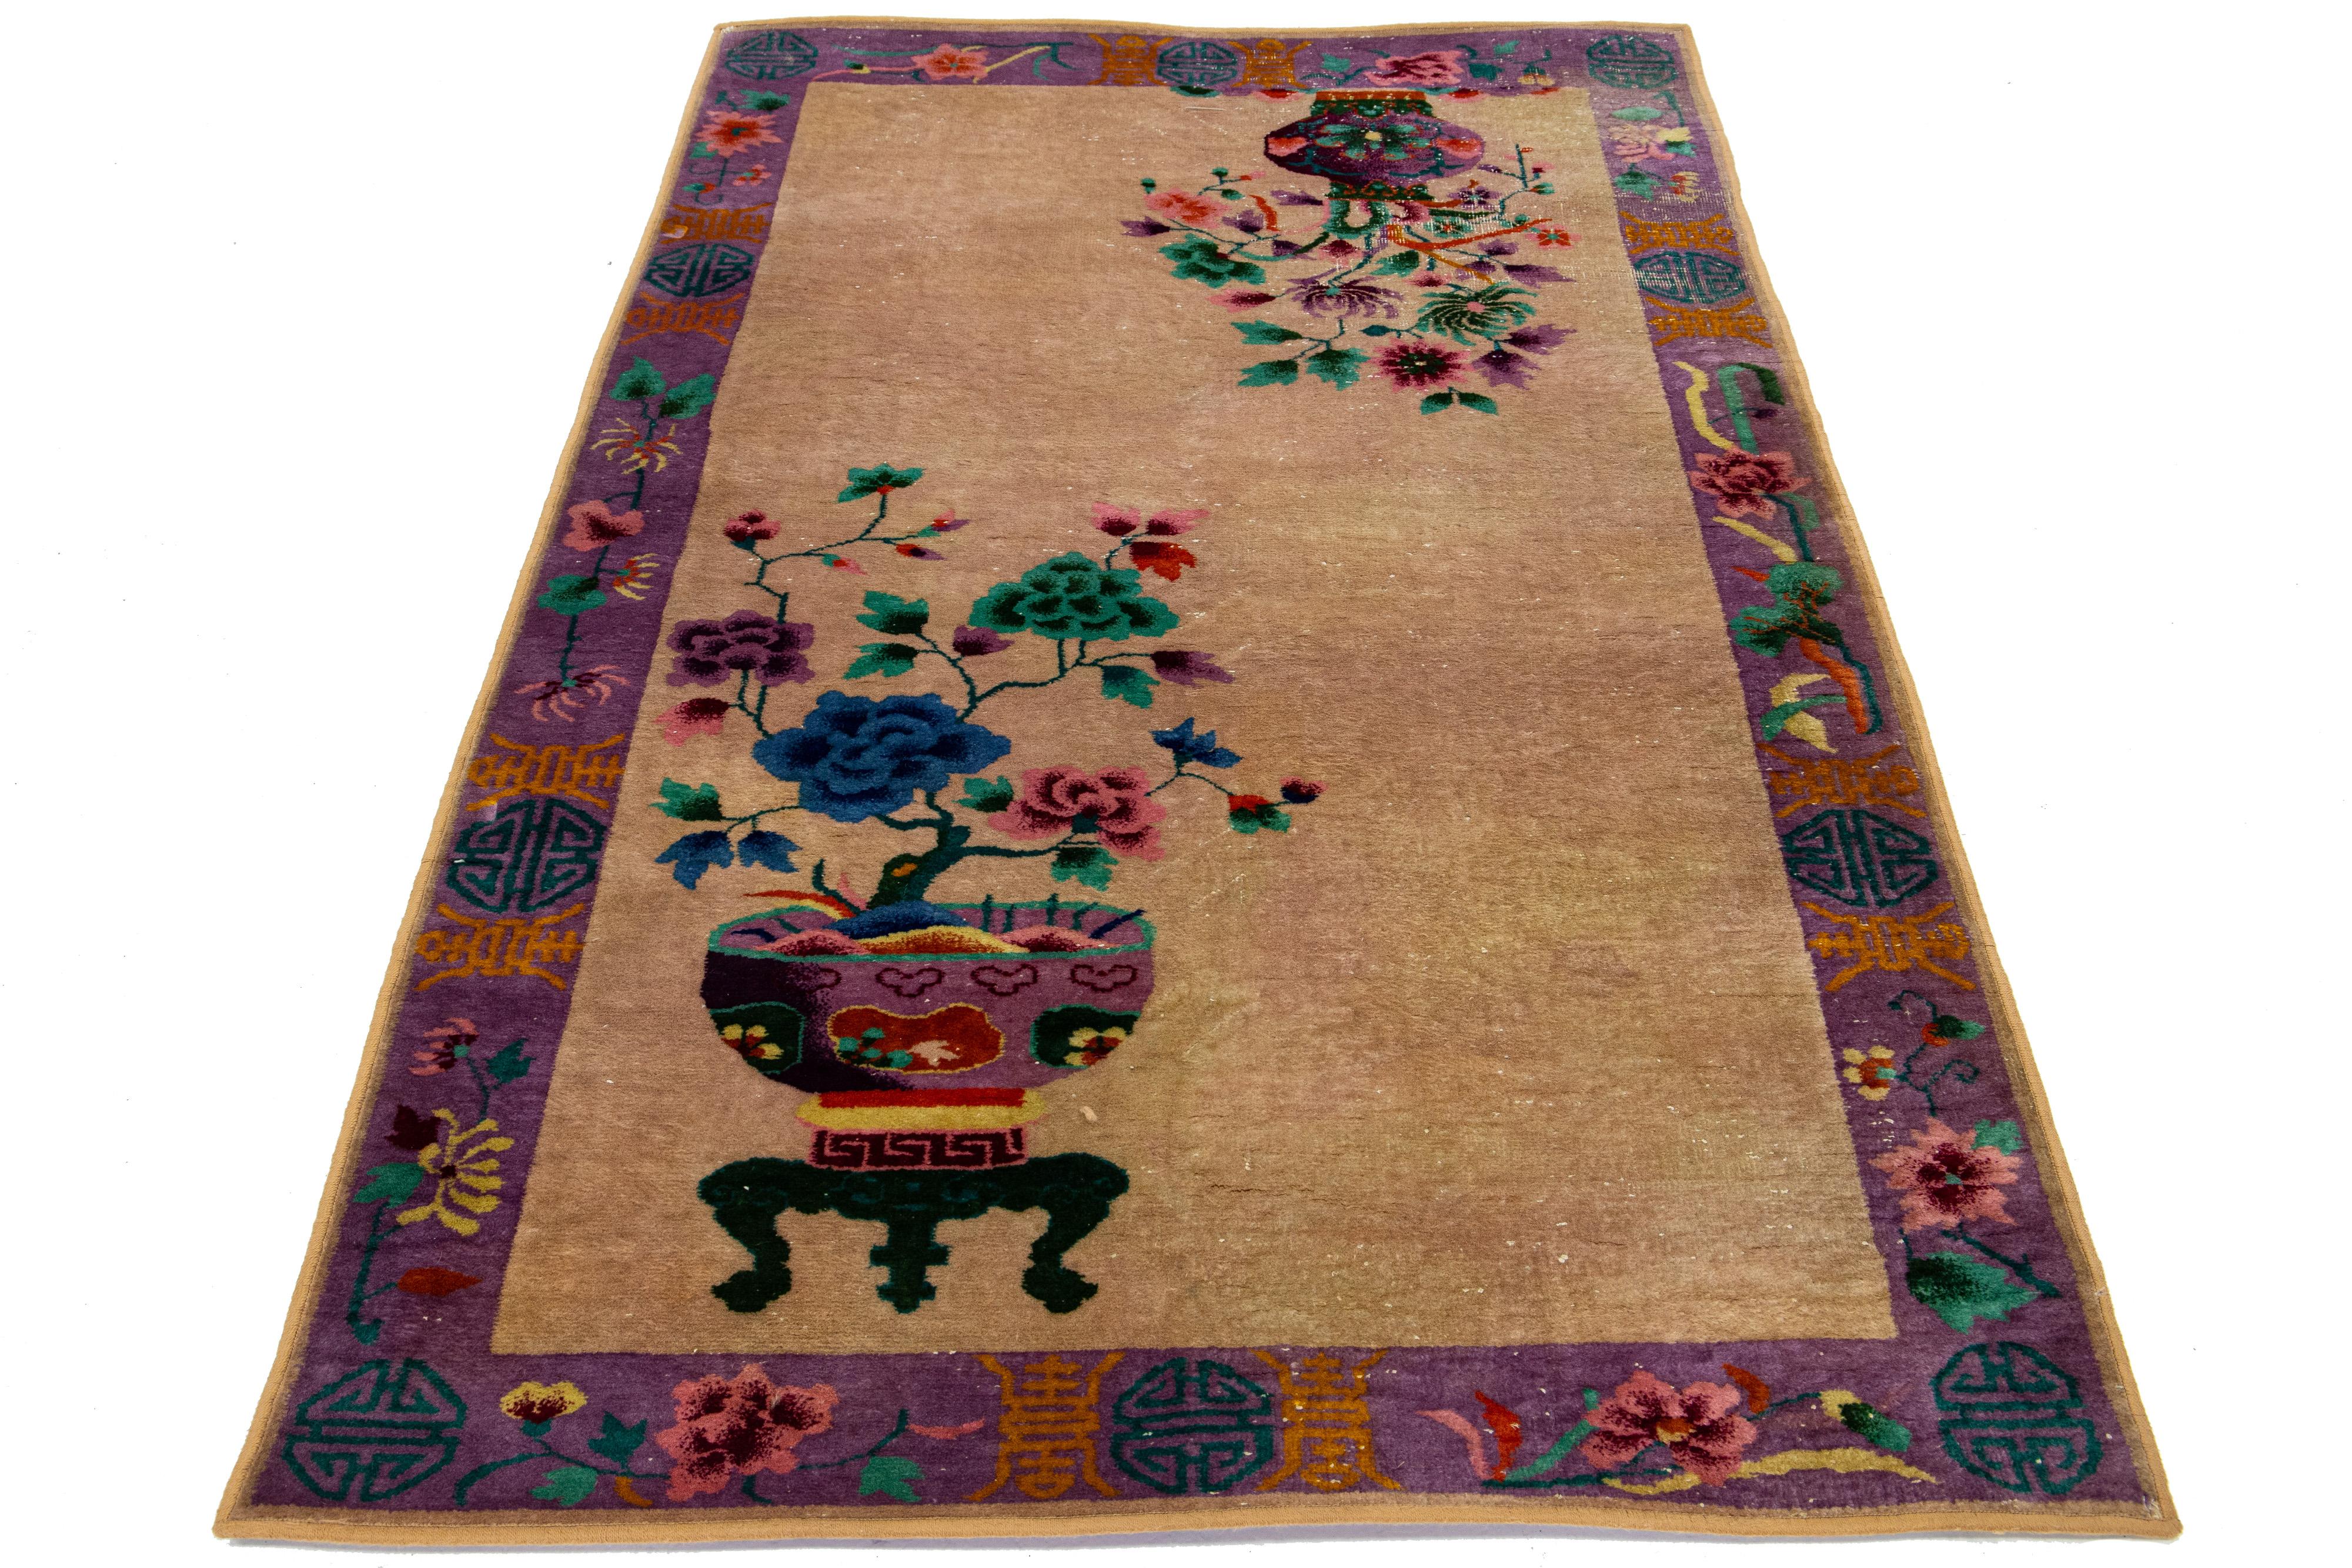 This antique art deco Chinese wool rug showcases a tan field with a decorative purple frame and multi-colored accents in an all-over Chinese classic motif.

This rug measures 4'1